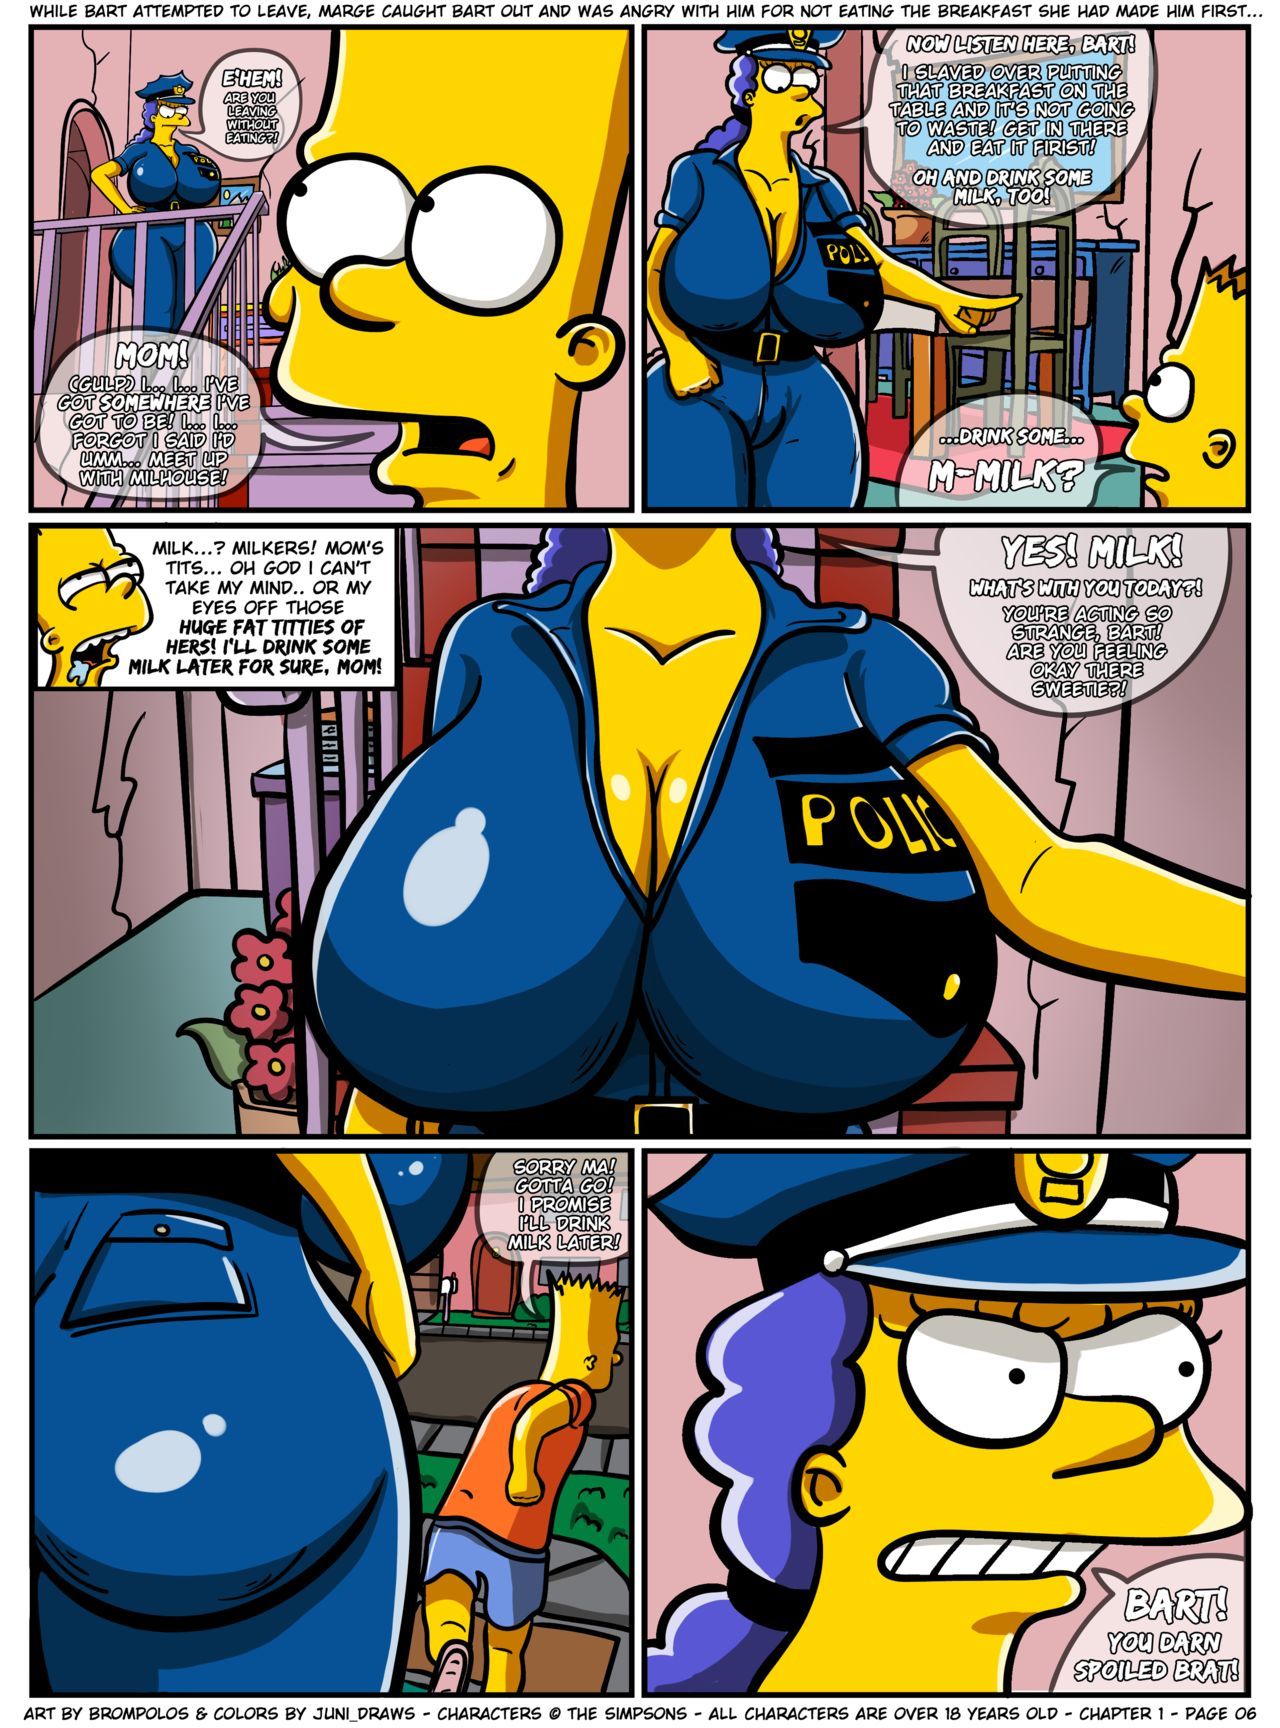 [Brompolos/Juni_Draws] The Sexensteins (Simpsons) [Ongoing] 7